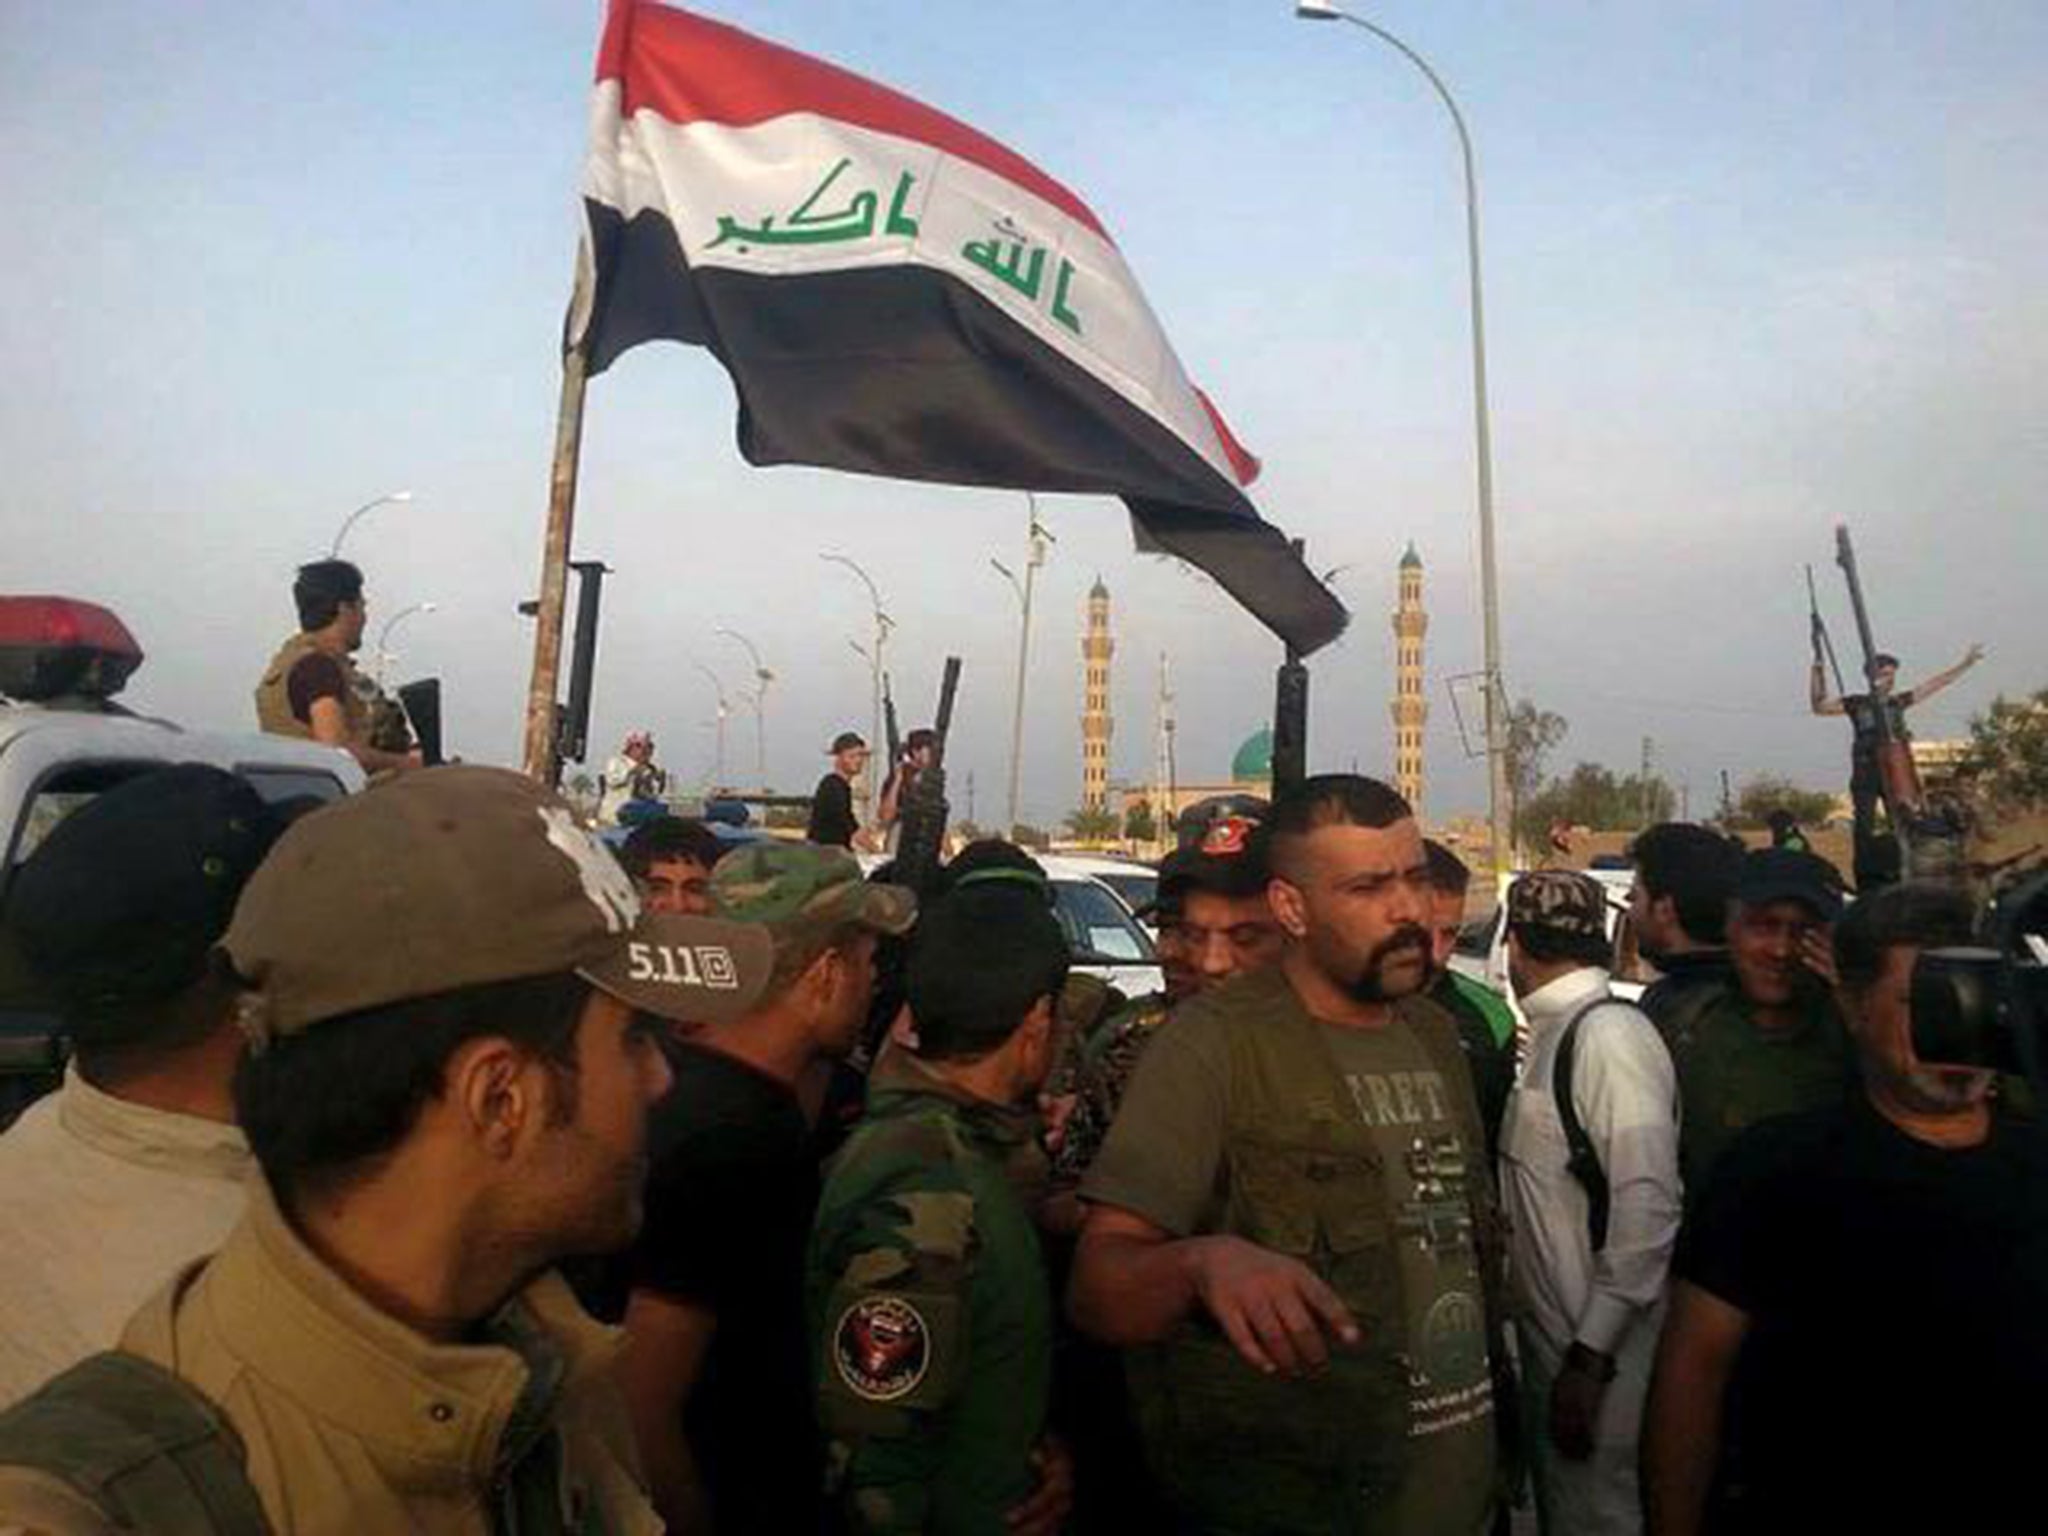 Reports that IS is getting weaker in Iraq is wishful thinking as shown by its capture of most of Ramadi